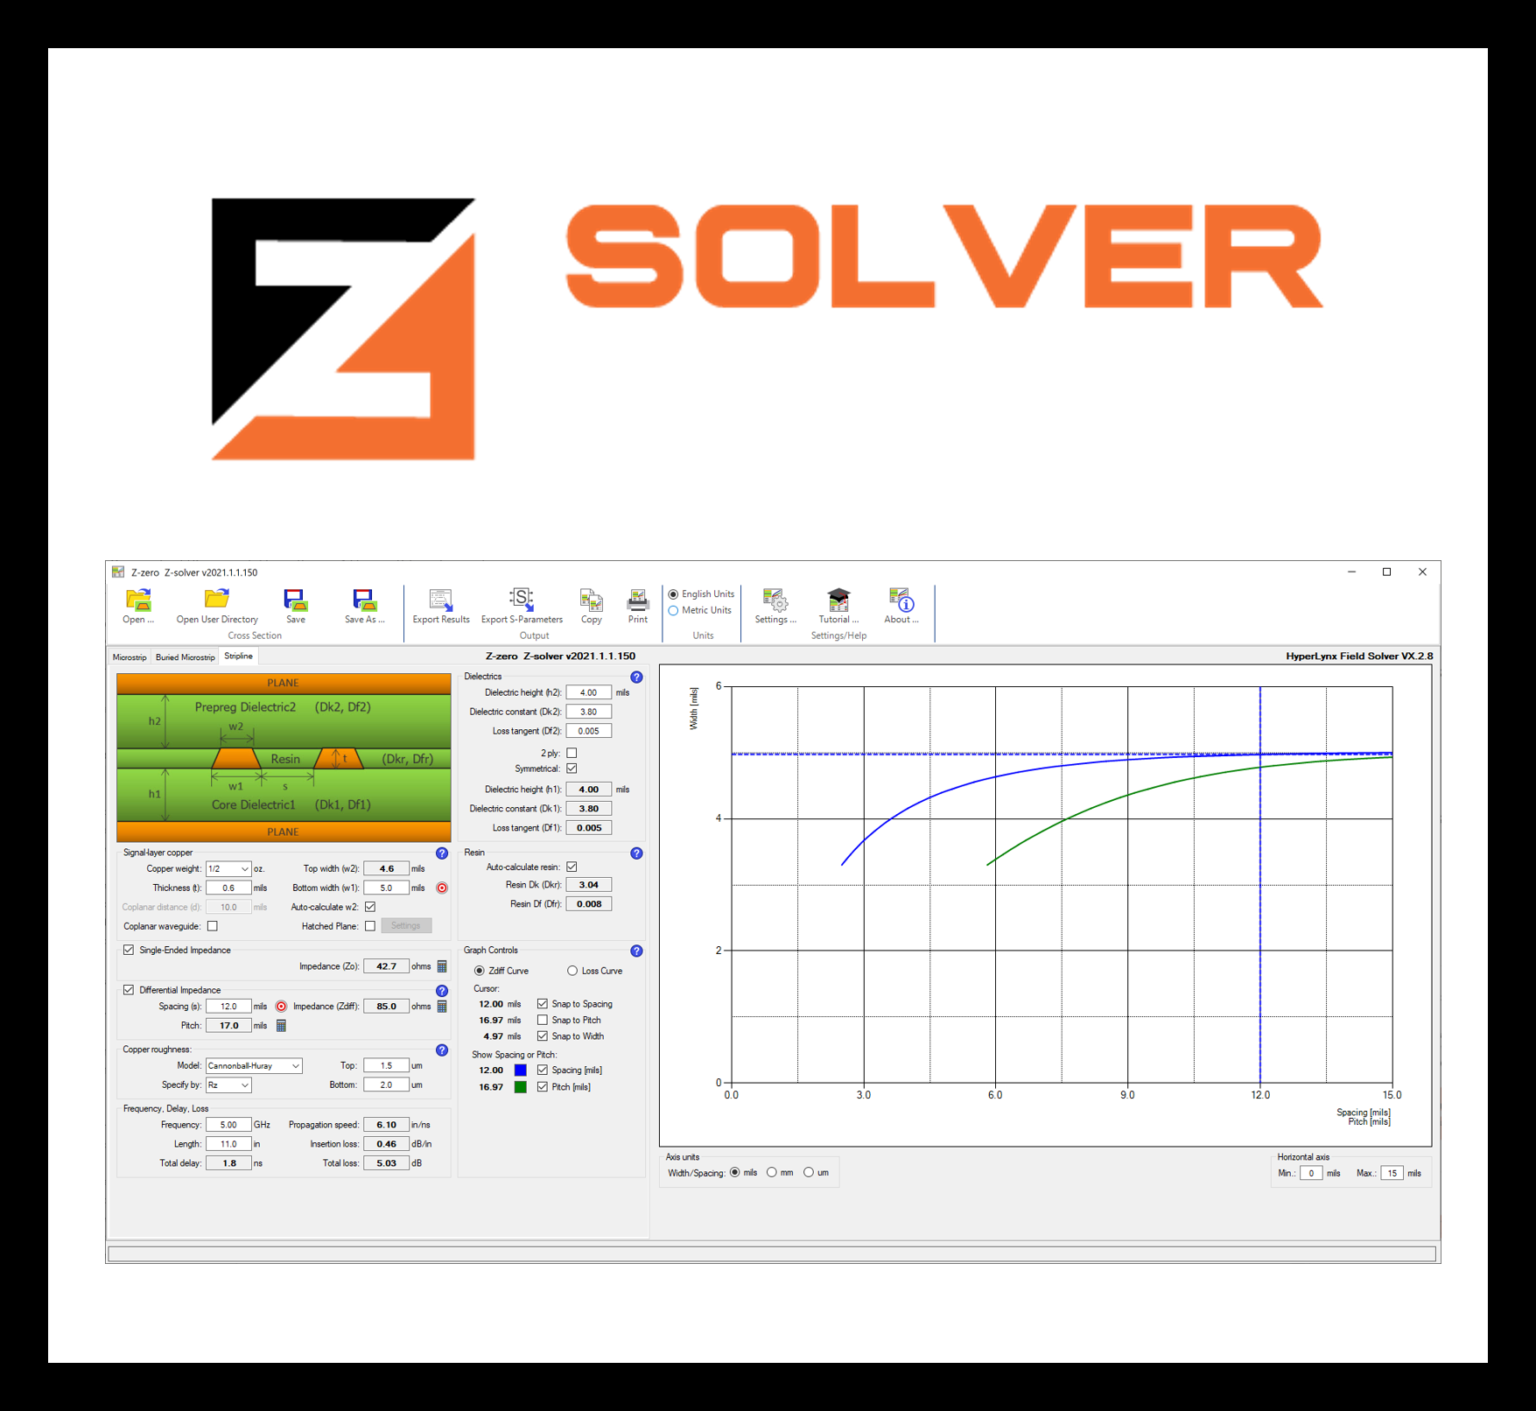 Z-solver_Perpetual-1-1536x1411-new